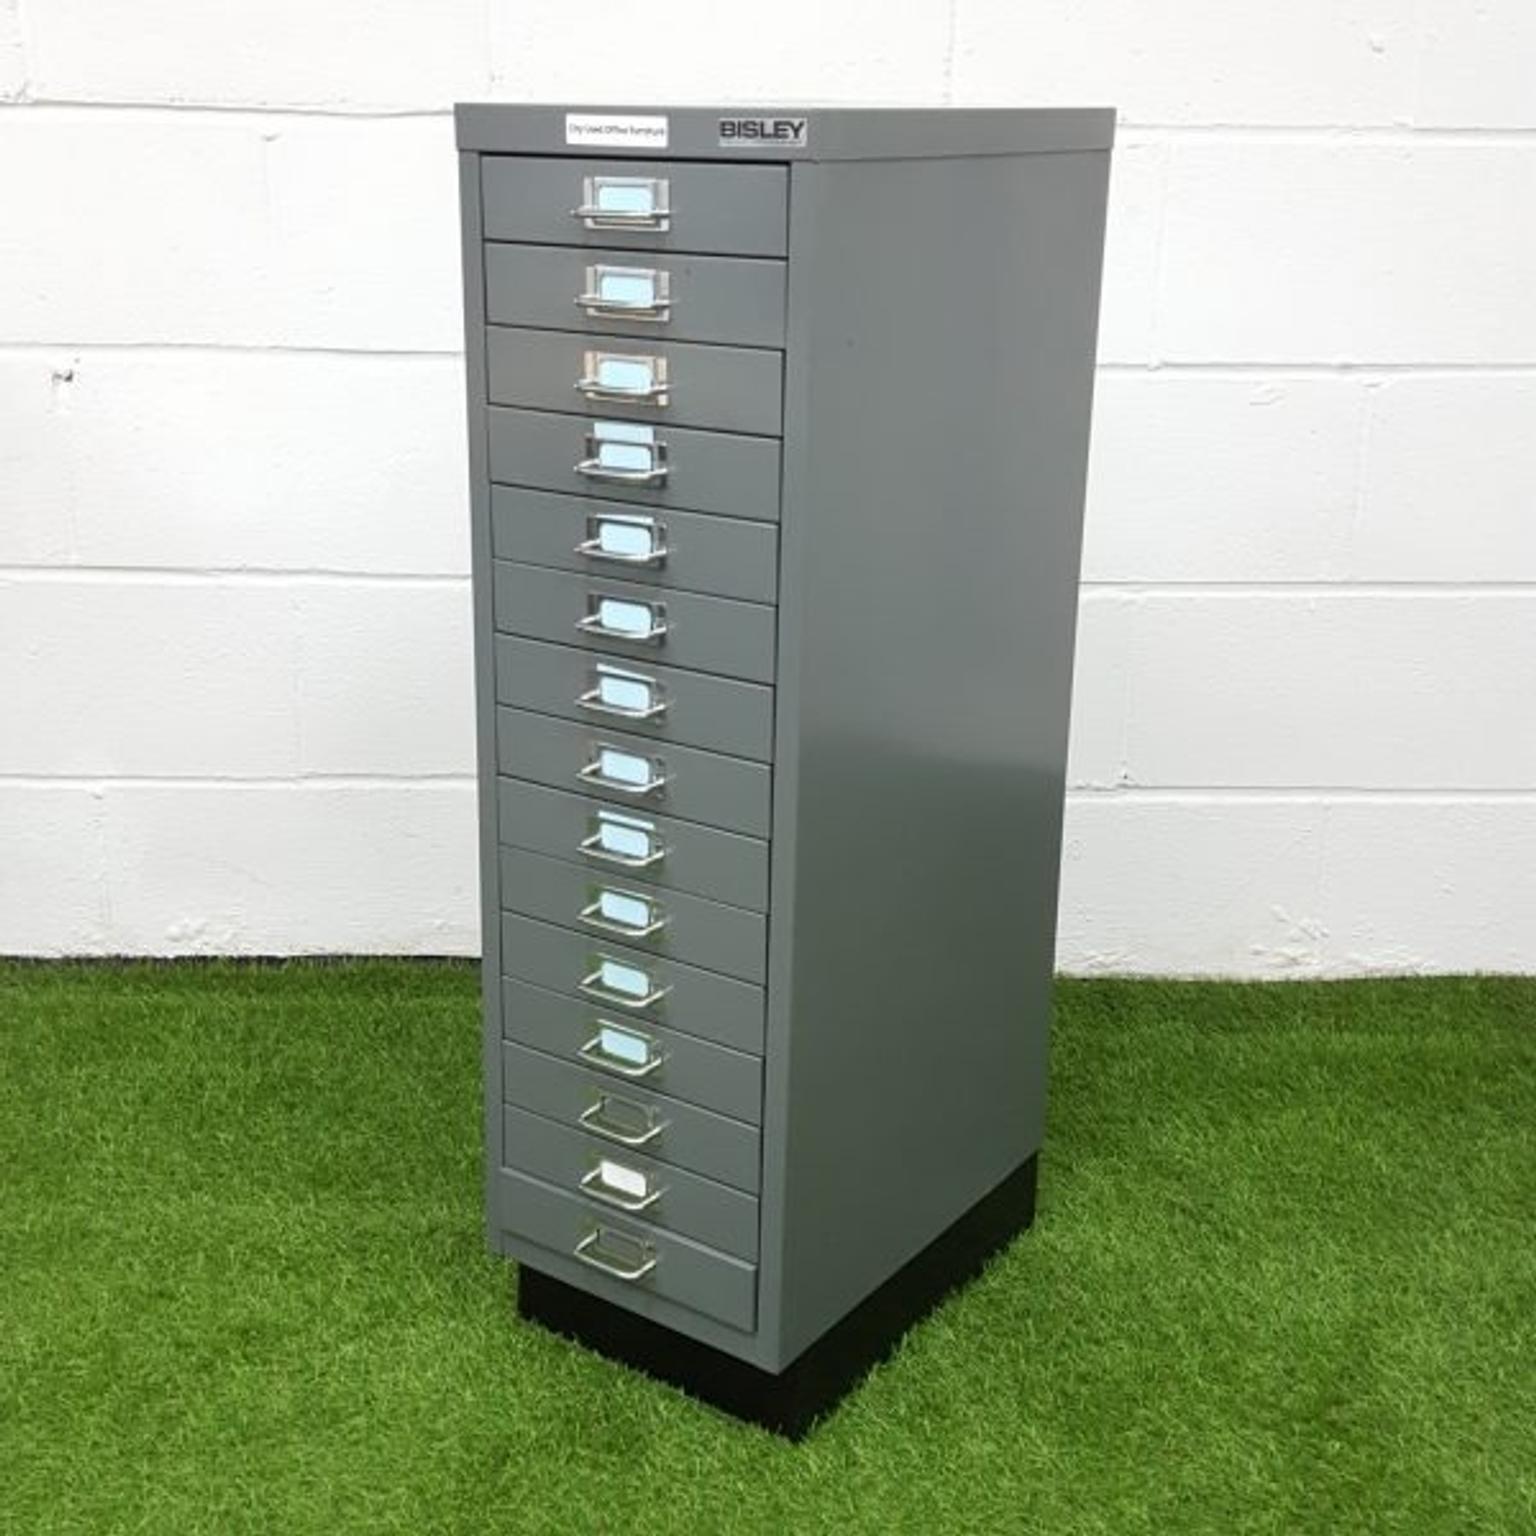 Bisley 15 Multi Drawer Filing Cabinet In Ch1 Chester Fur 89 00